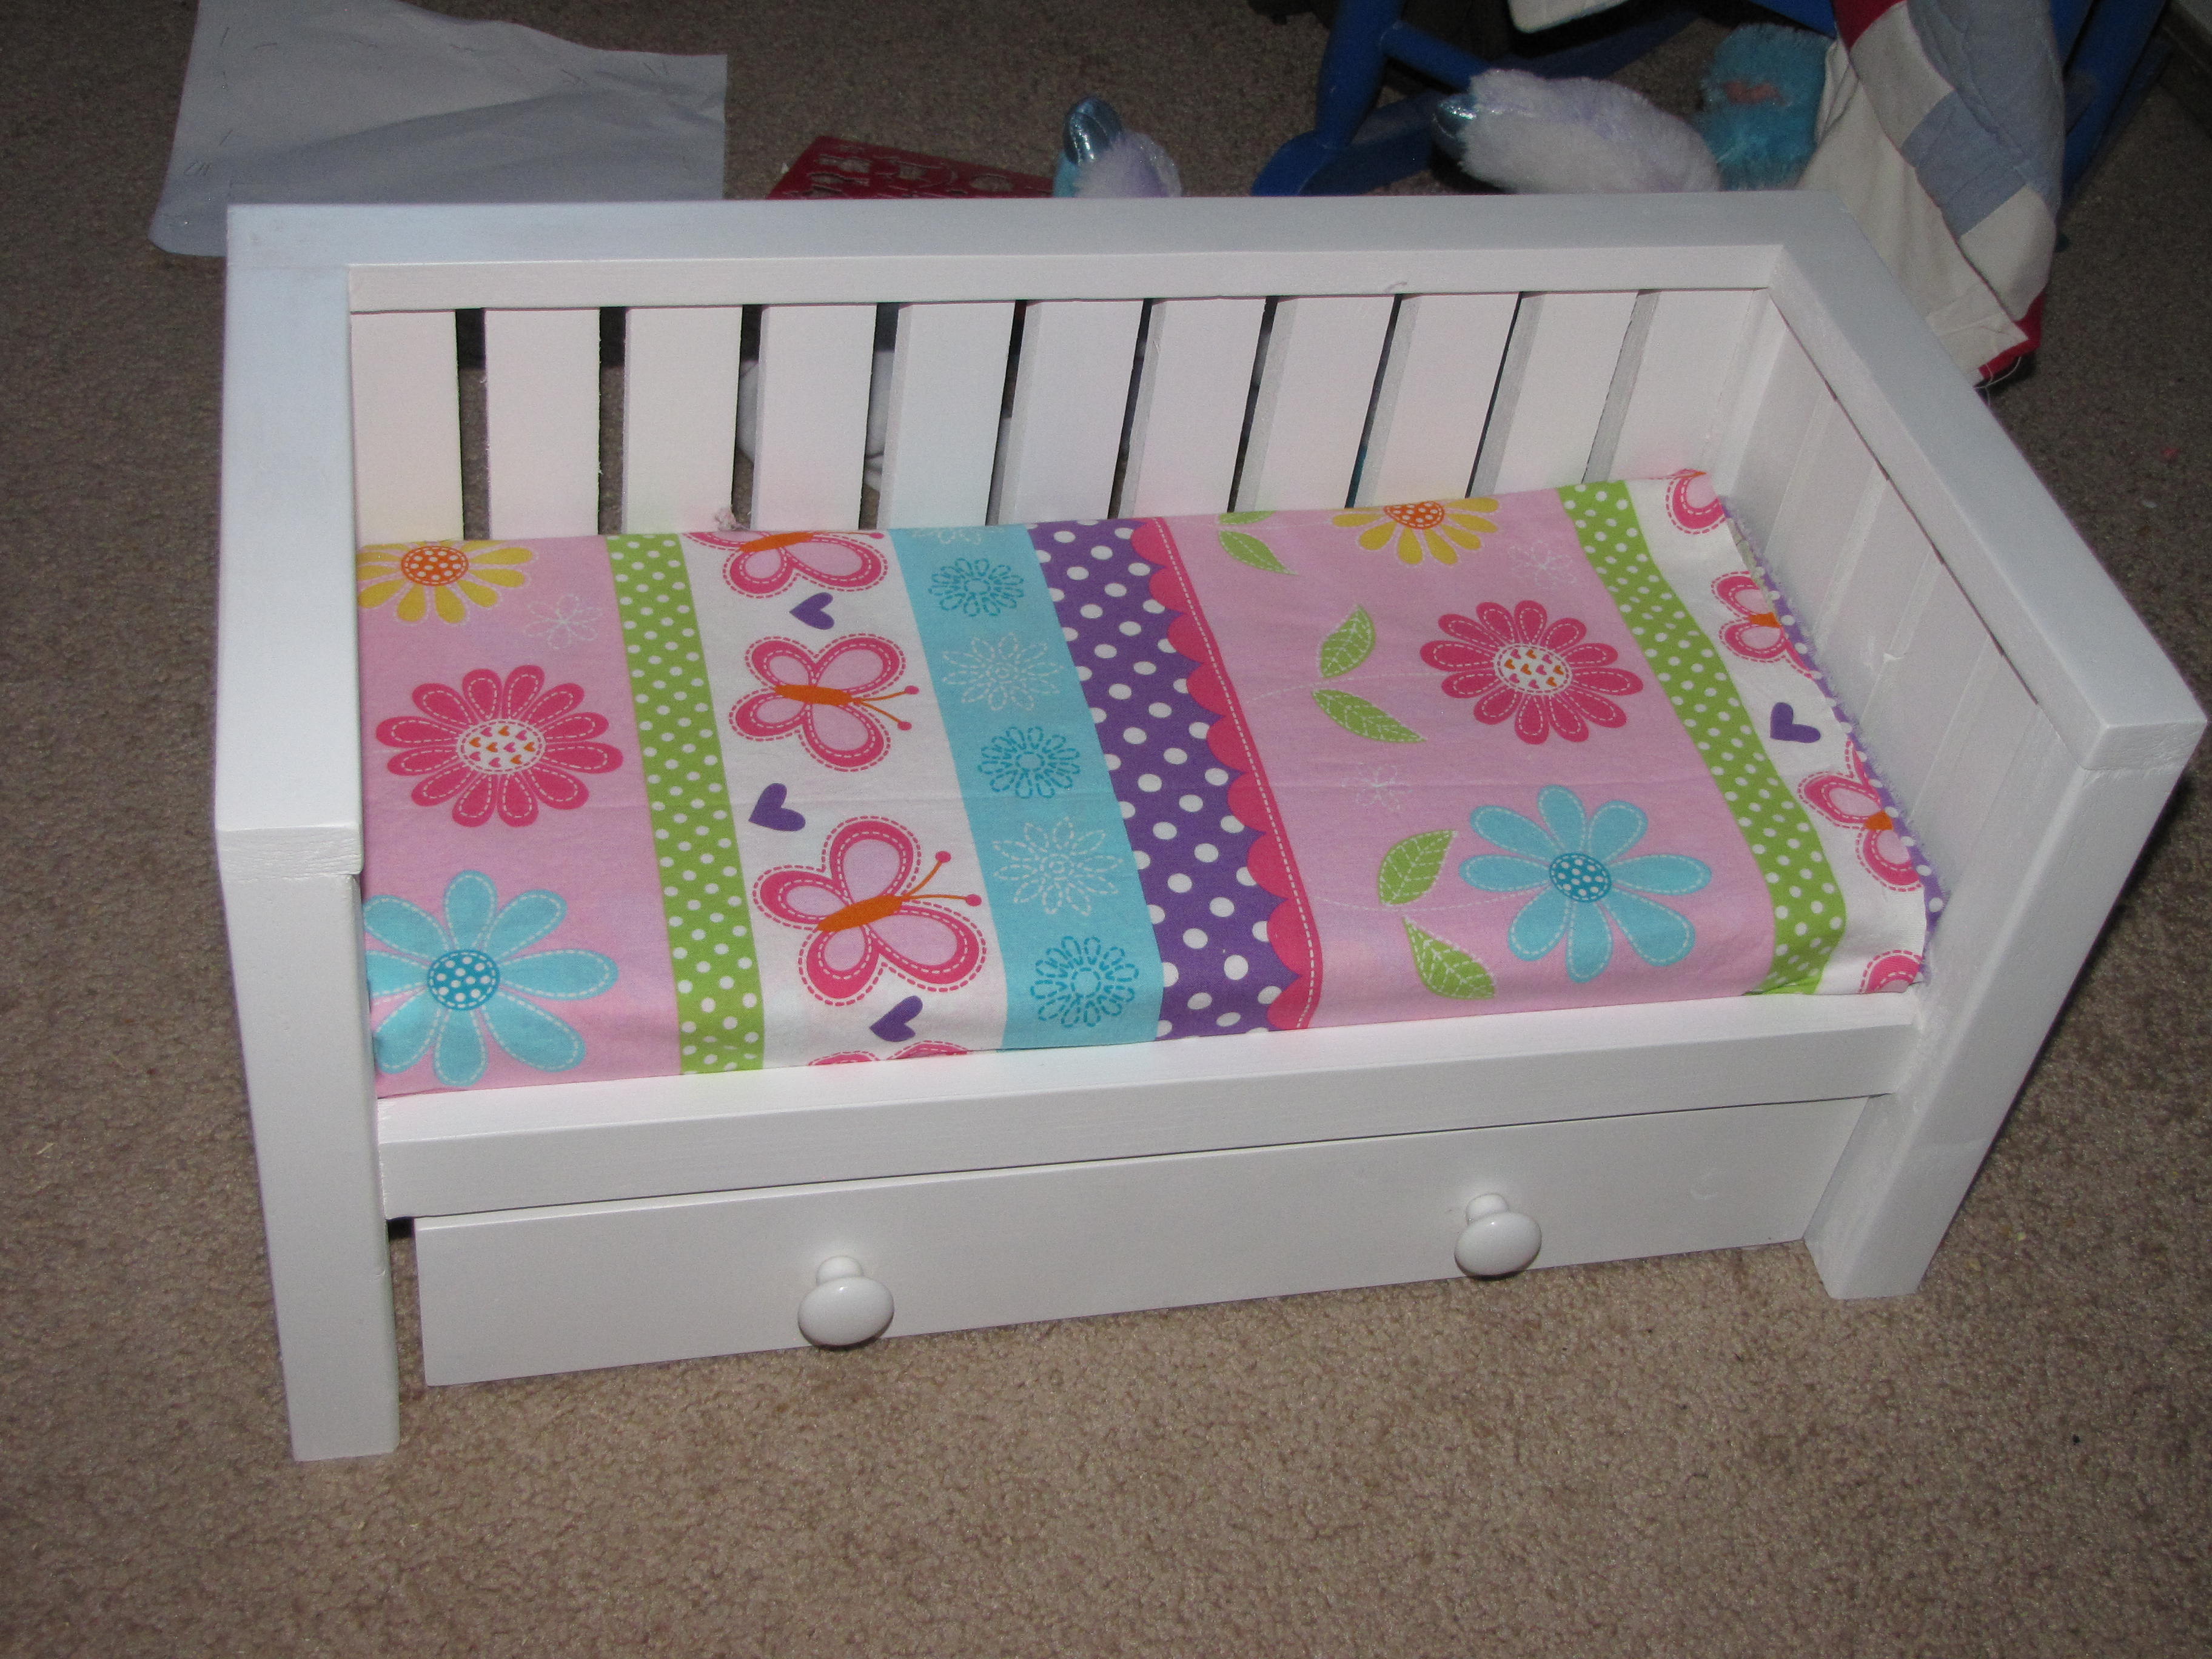 ana white doll bed